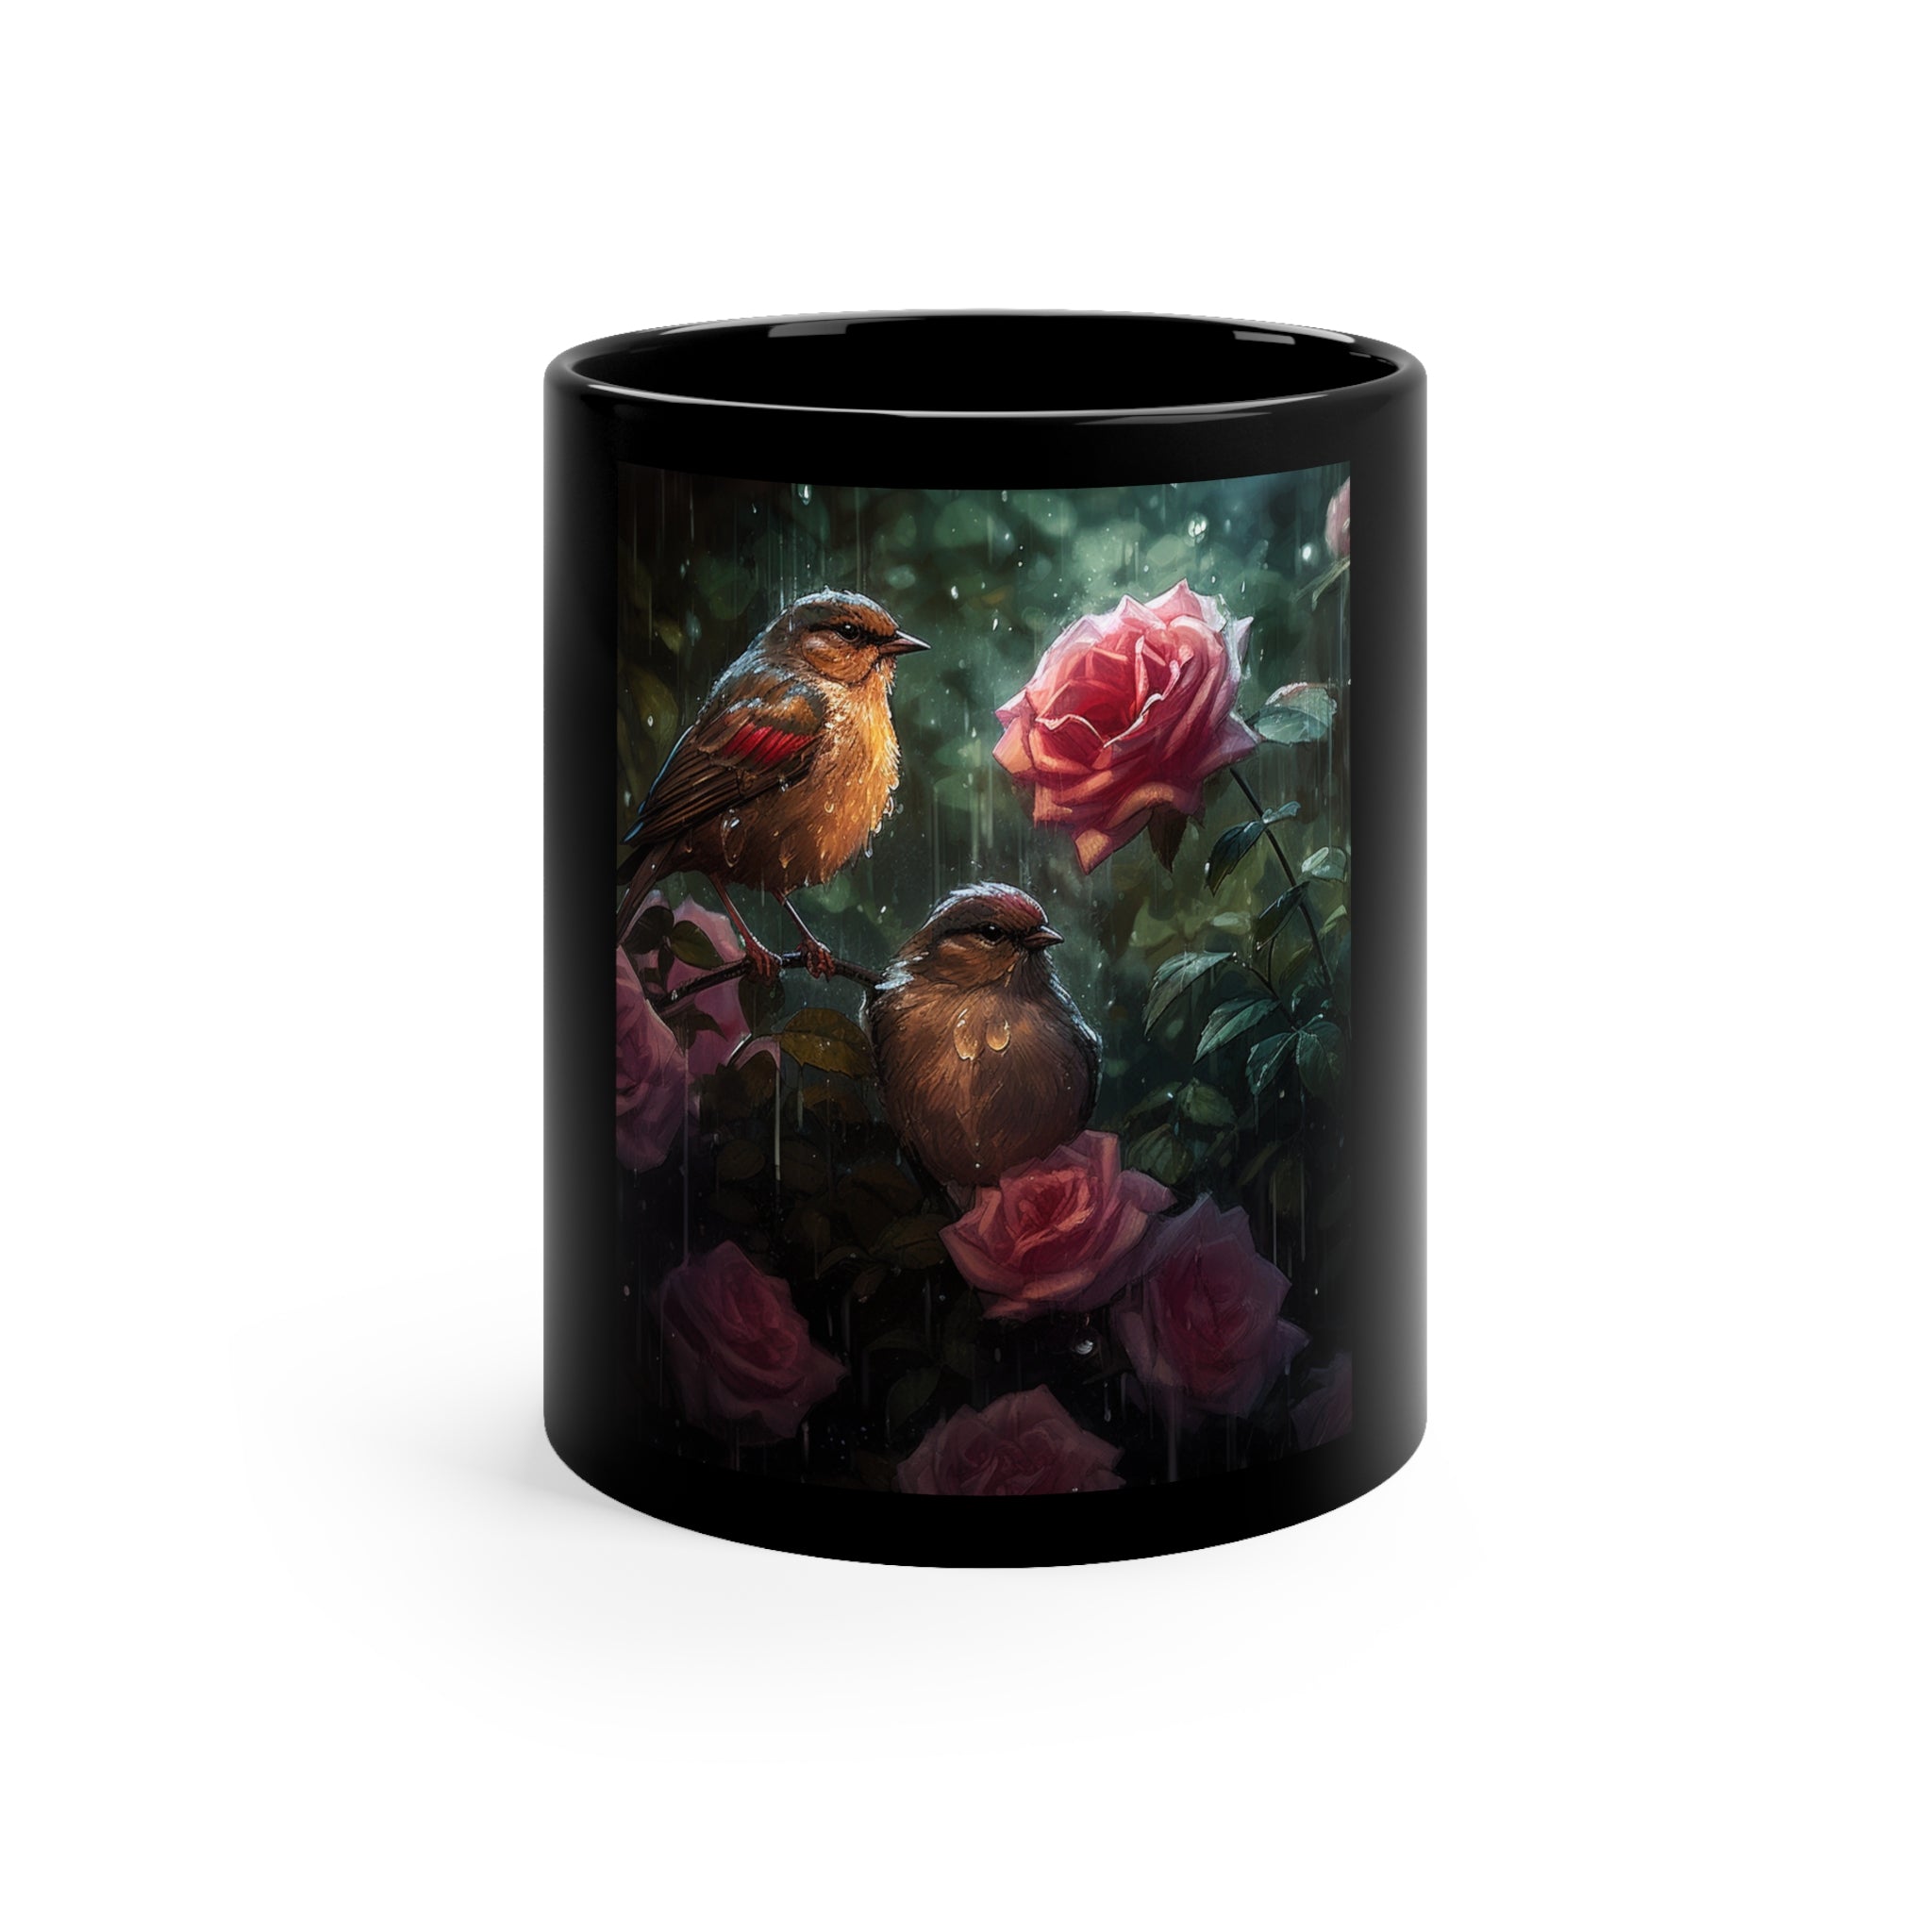 Cute Floral Coffee Mug Coffee Cup With Beautiful Photorealistic Flowers and Birds for Hot Starbucks Coffee or Yeti Drinks